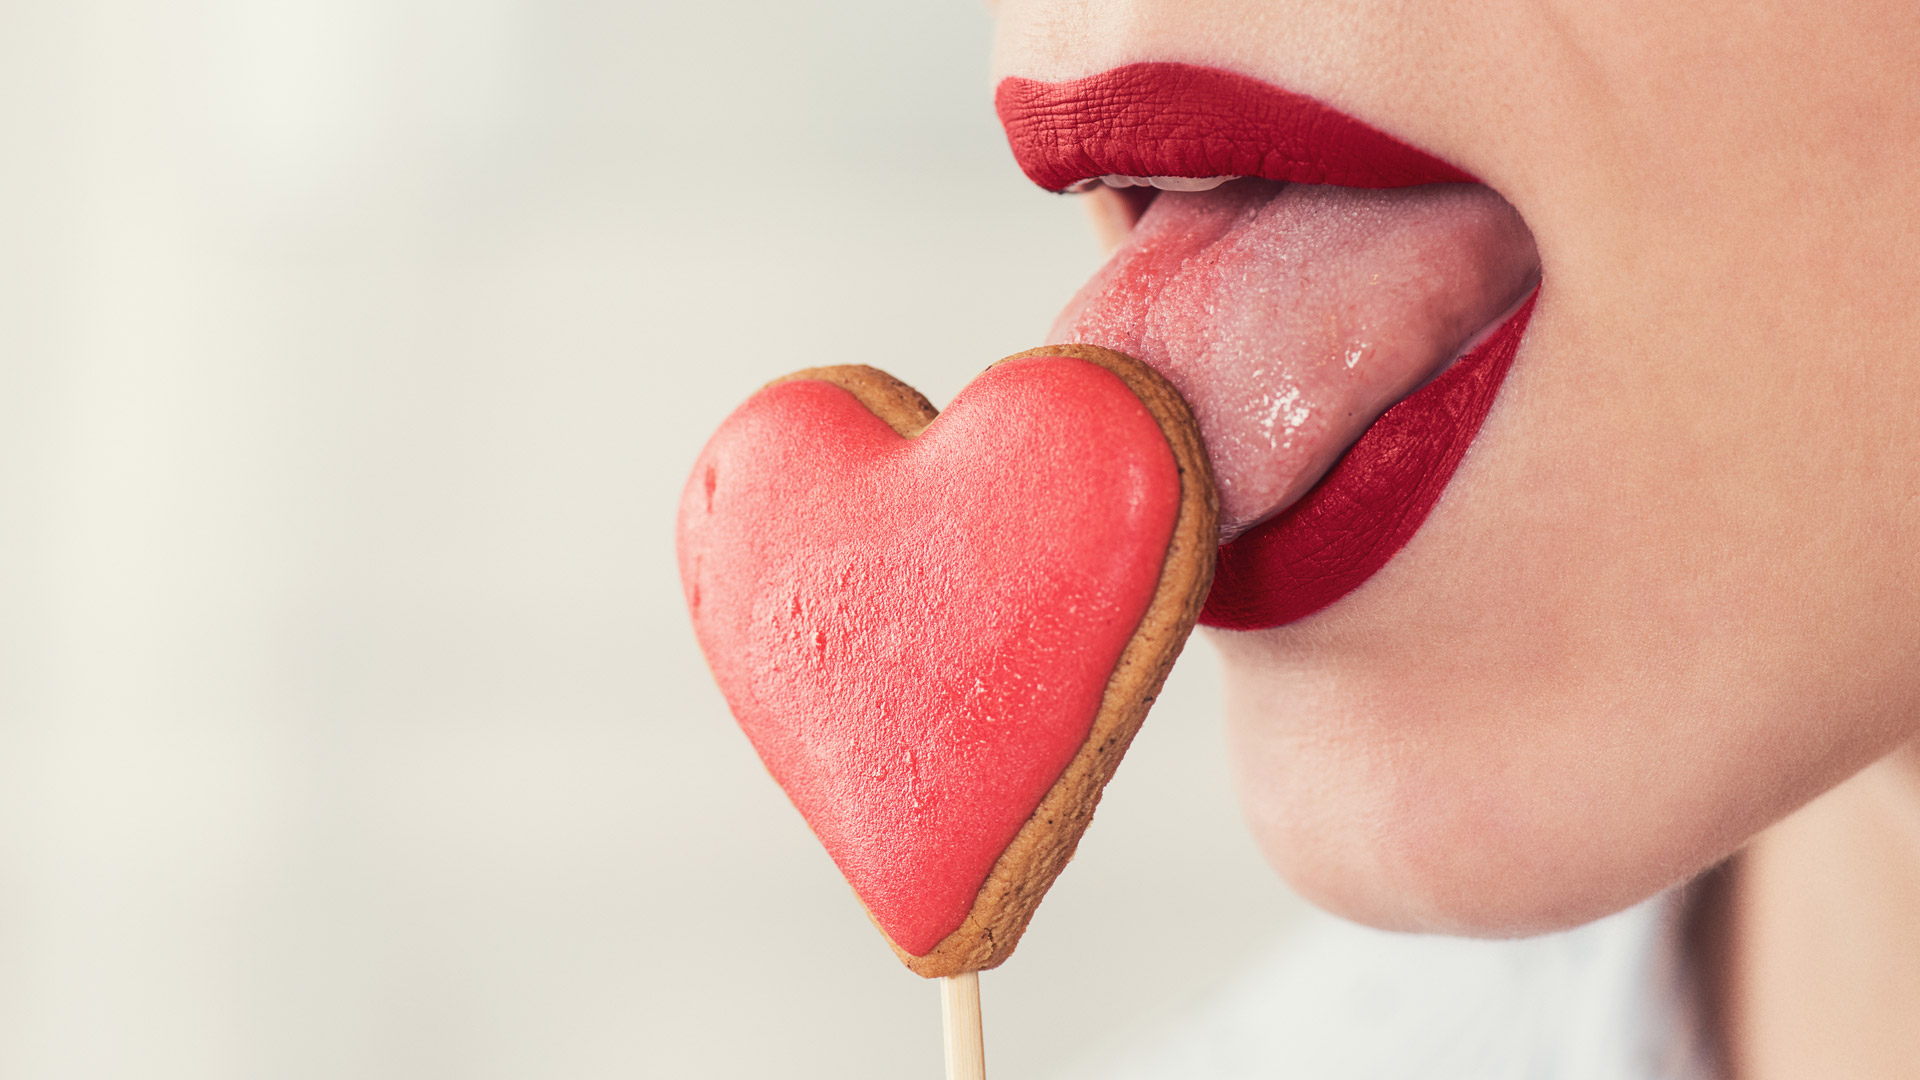 Female mouth with dark red lipstick licking a lollipop in the shape of a love heart.